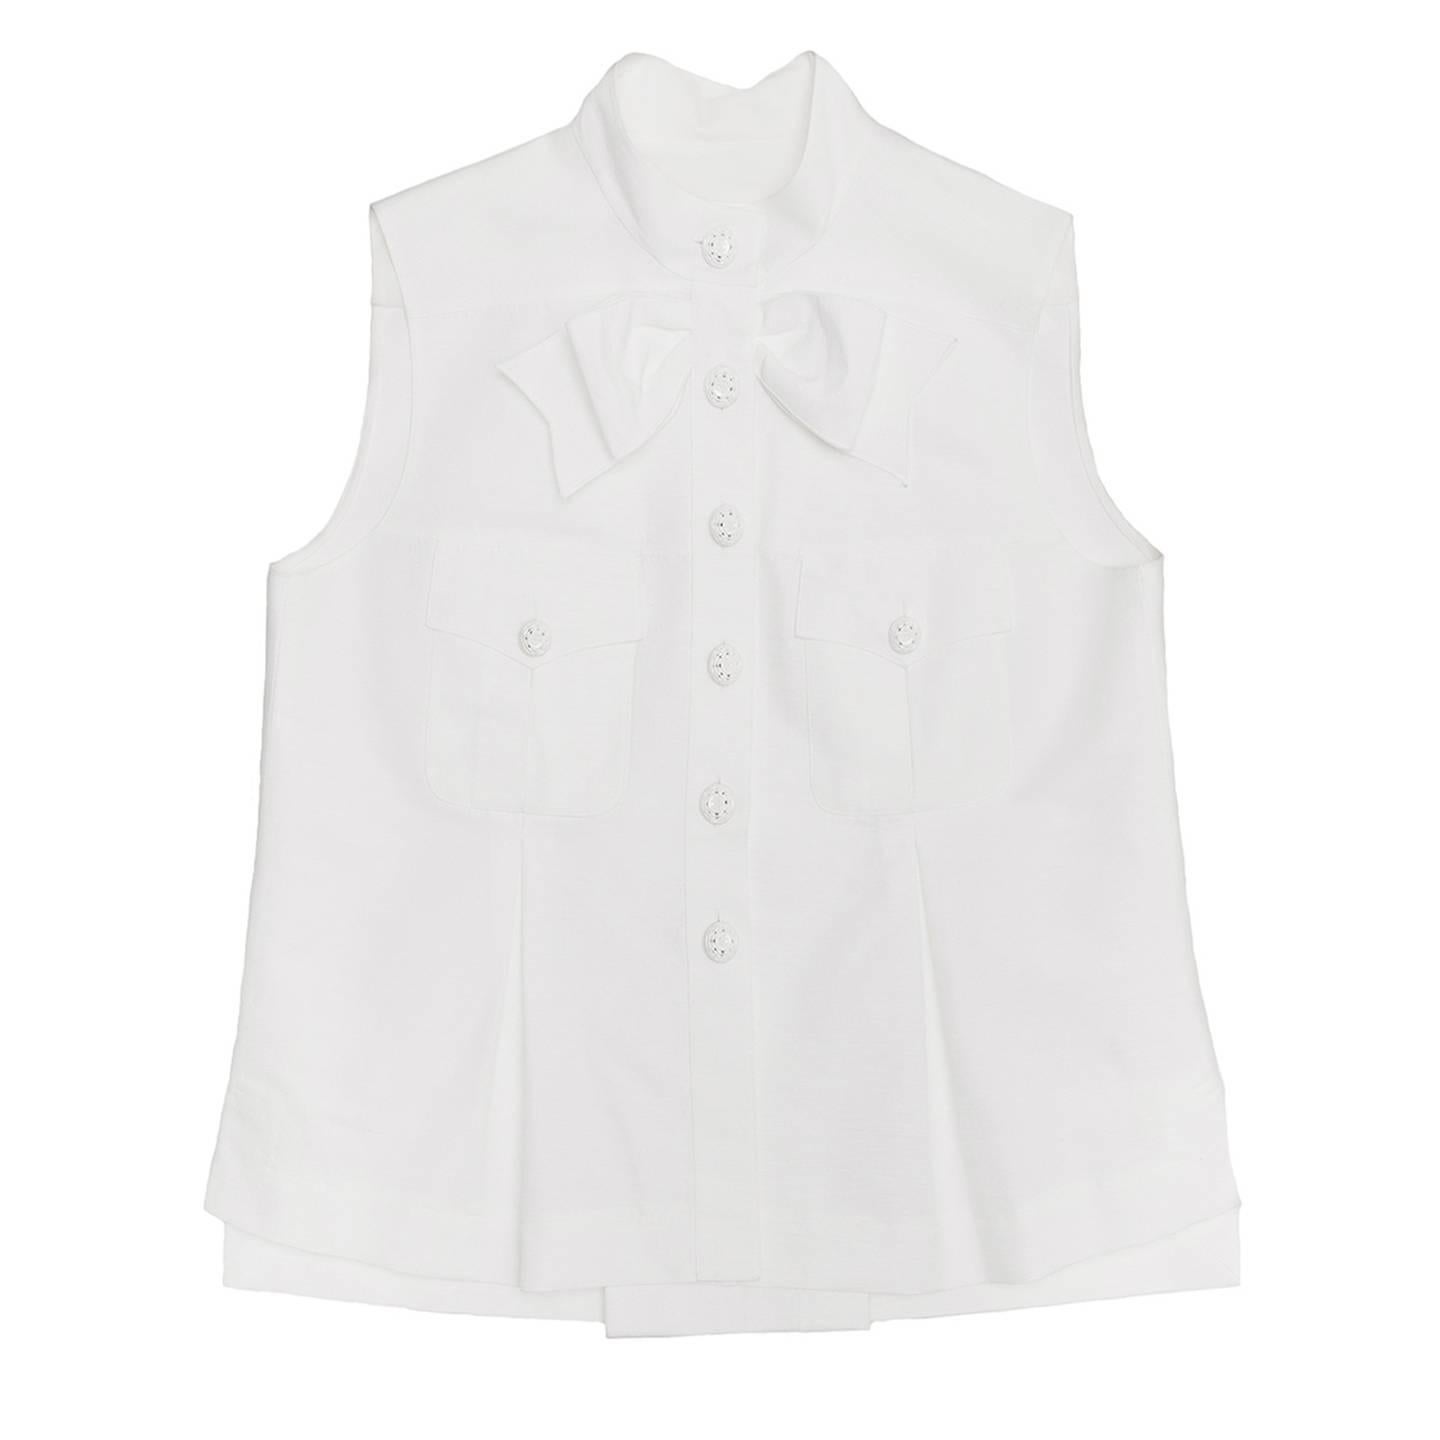 Elegant sleeveless ribbed white cotton blend shirt or jacket with nehru collar and white varnished metal flower buttons with Chanel logo embossed. The front is embellished by a large bow at under collar and bellow patch pockets with flaps fastened